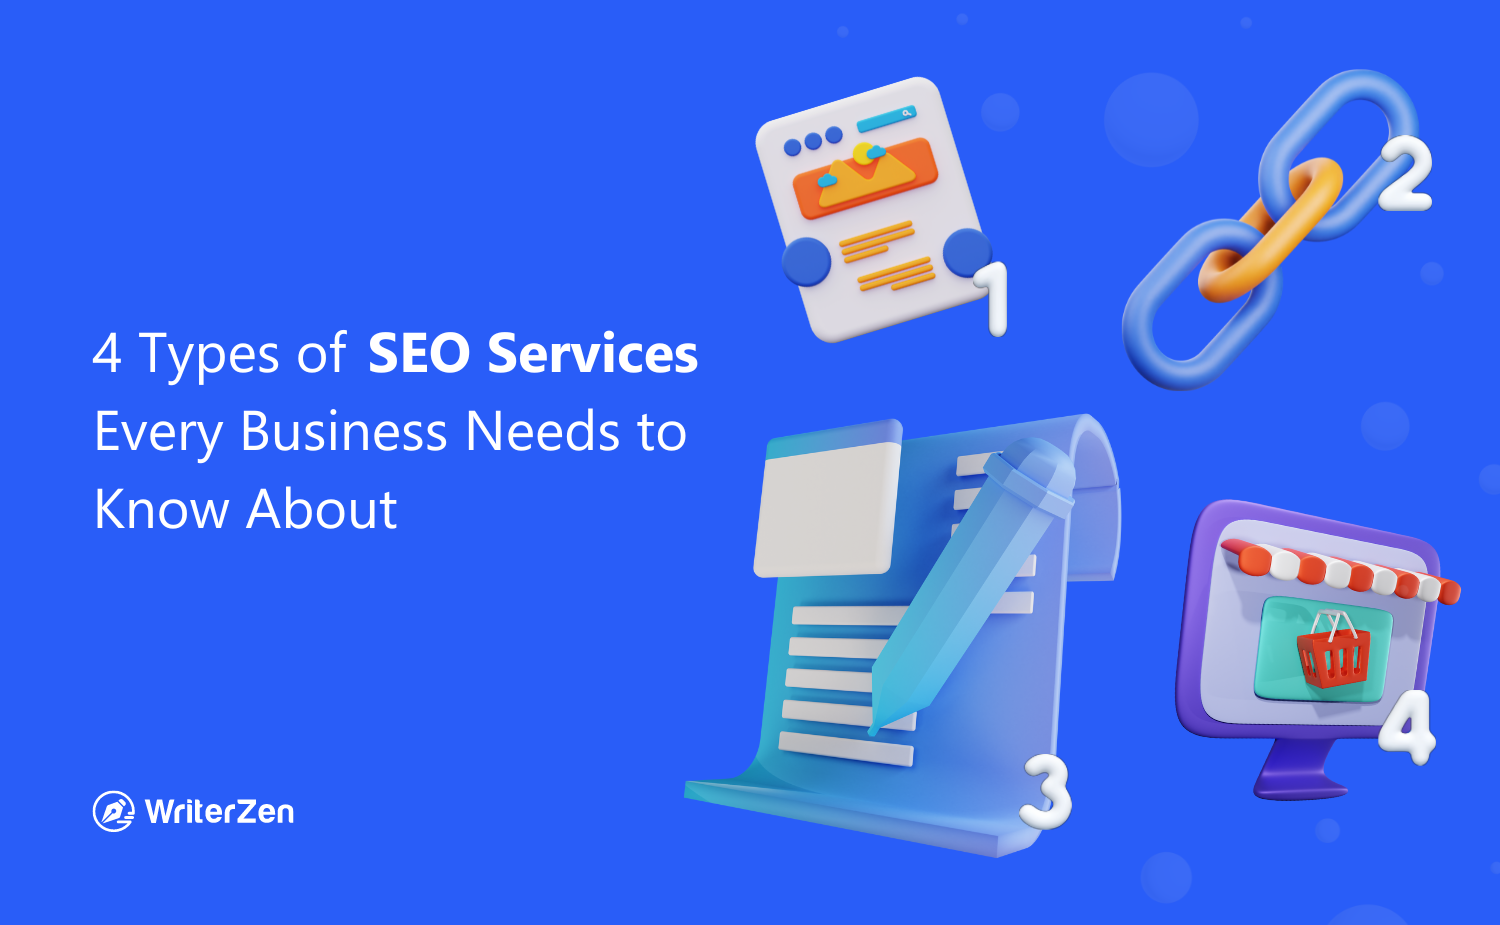 4 Types of SEO Services Every Business Needs to Know About